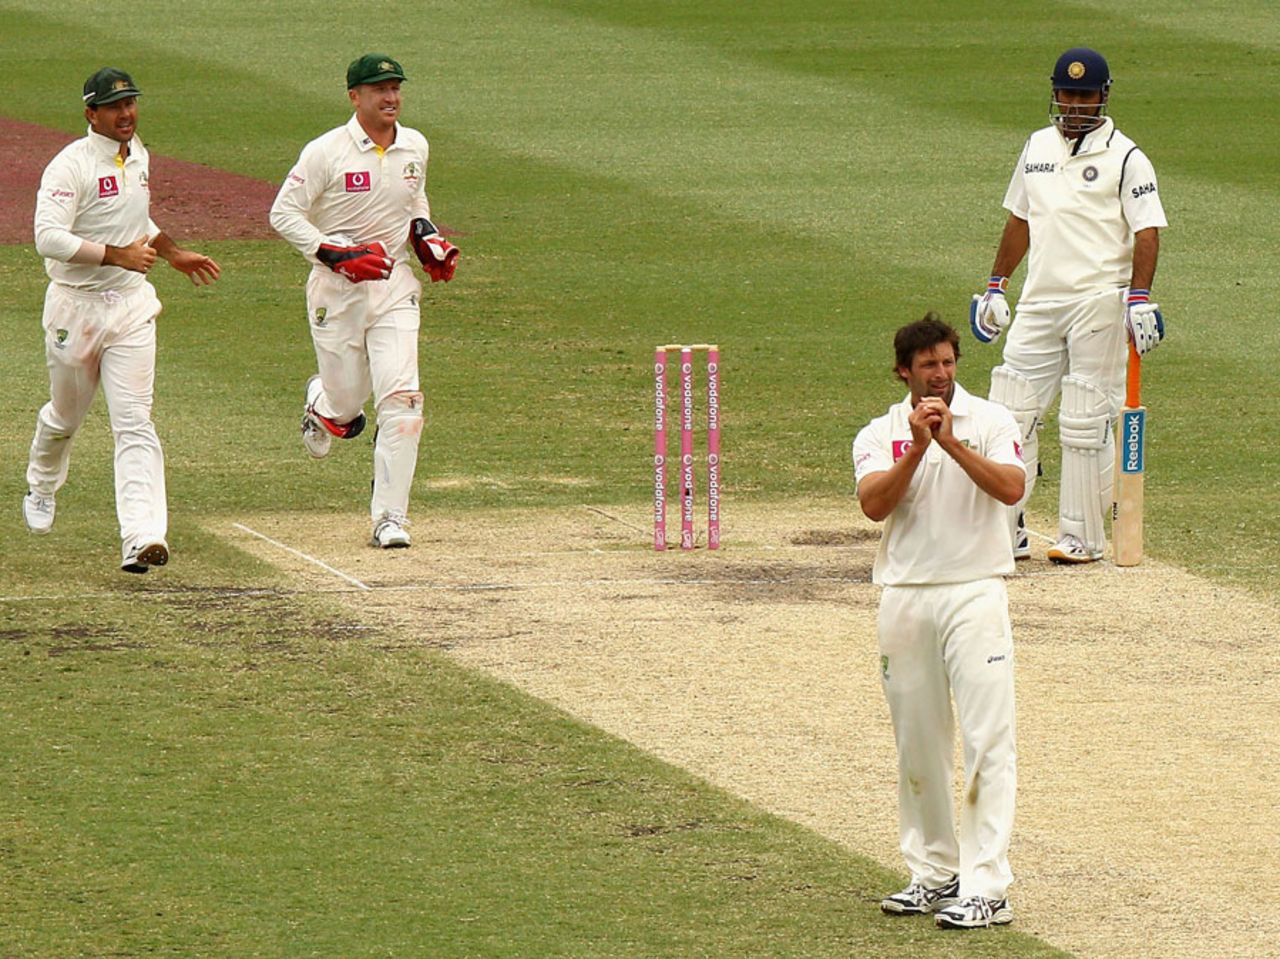 Ben Hilfenhaus dismissed MS Dhoni caught and bowled, Australia v India, 2nd Test, Sydney, 4th day, January 6, 2012